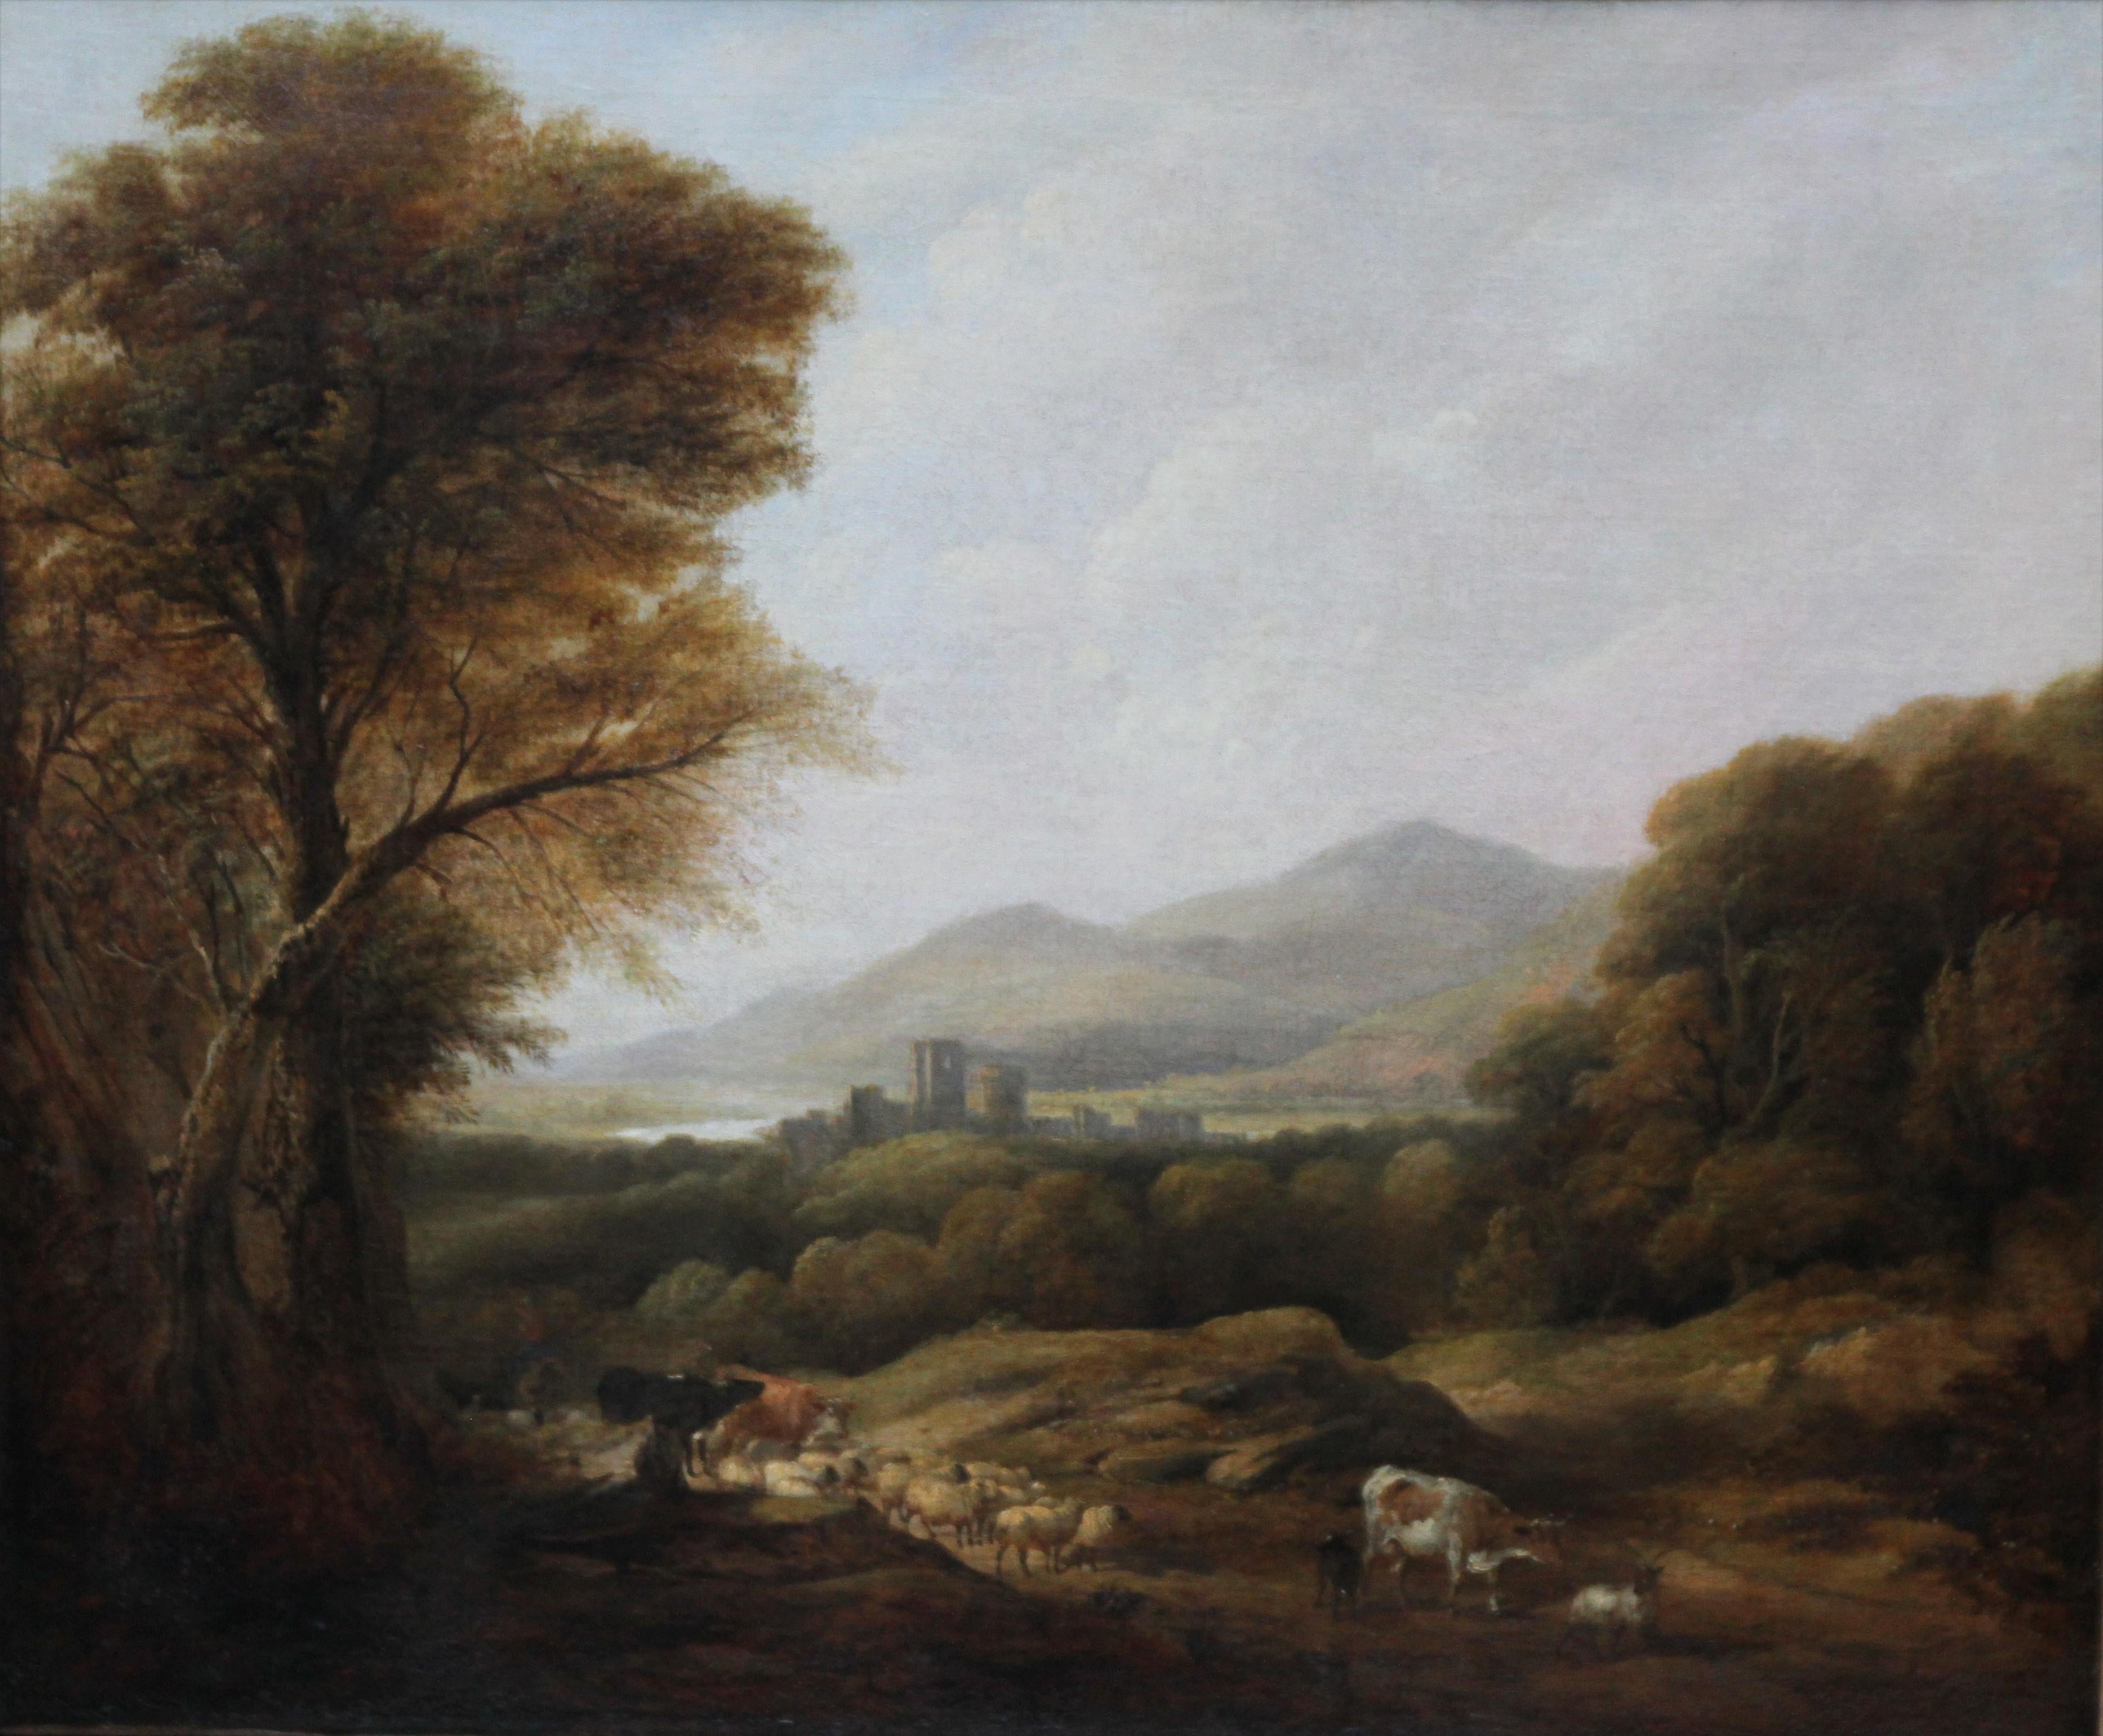 Cattle and Drover in a Landscape - British Victorian art landscape oil painting 4